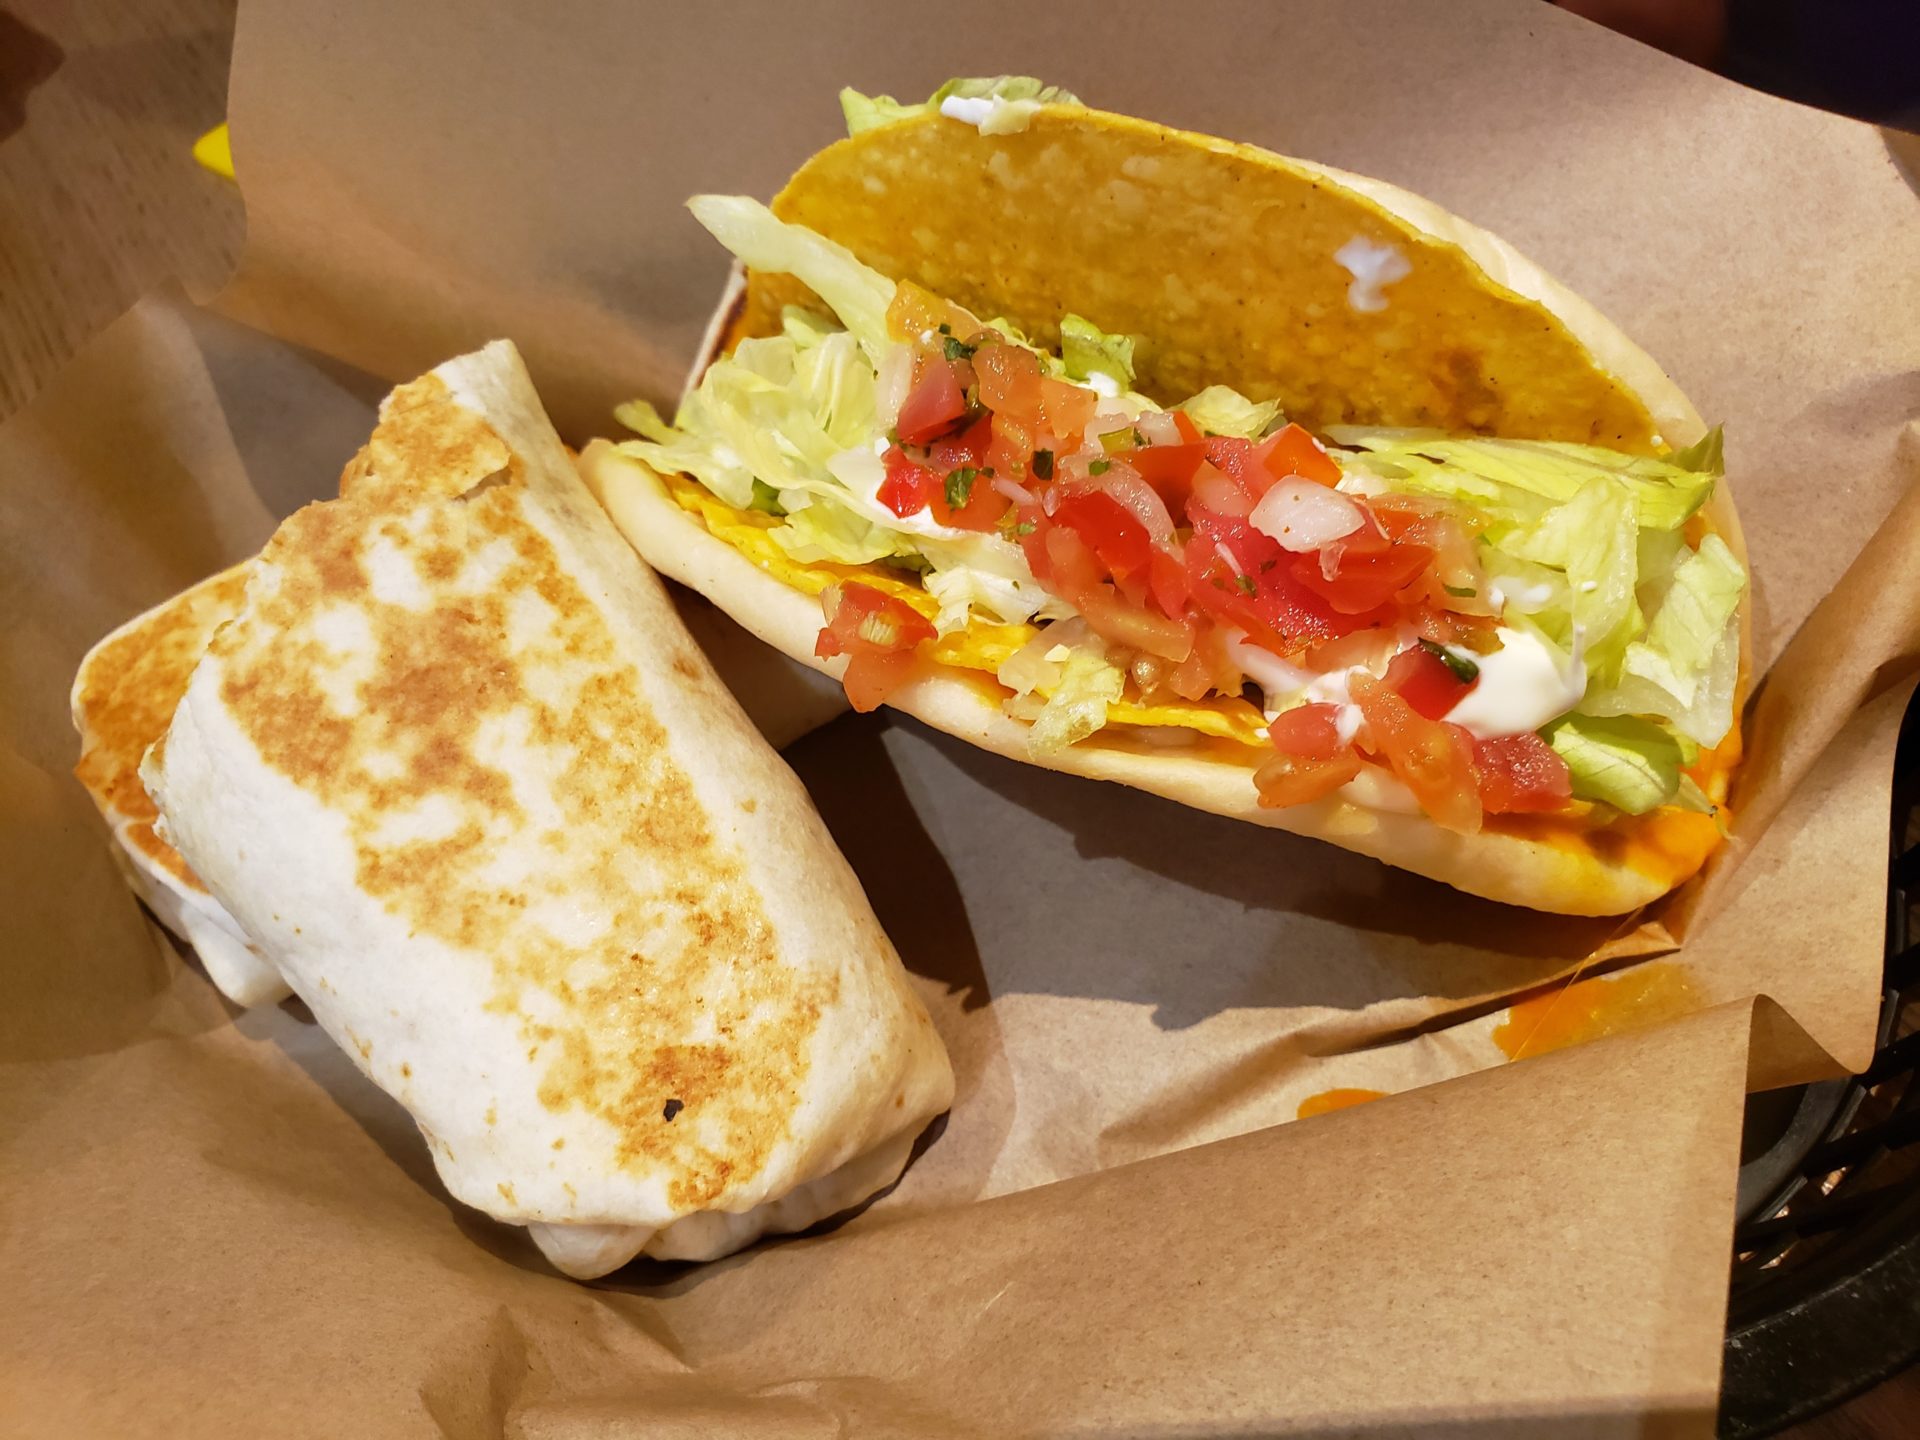 a taco and burrito on a brown paper